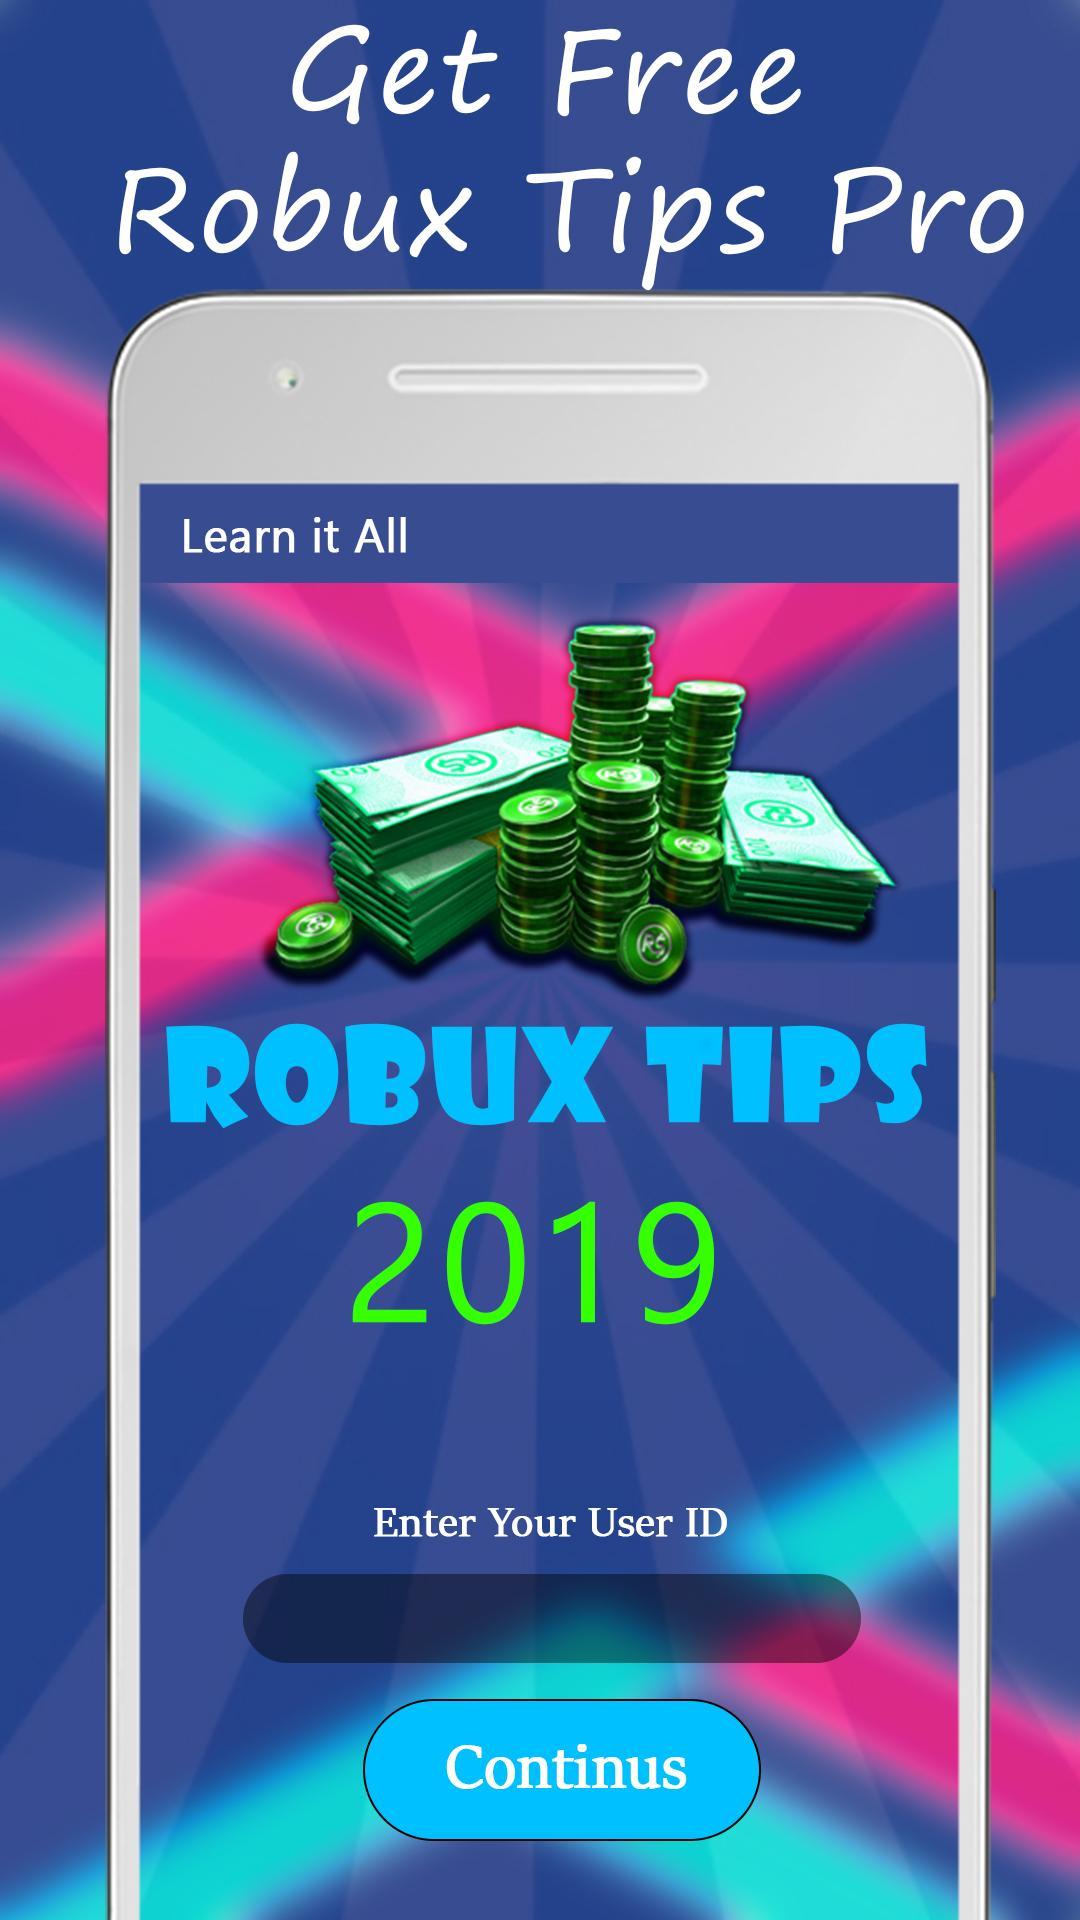 Get New Free Tips Robux For Roblox Guide 2k19 For Android Apk Download - guide for roblox free robux for android apk download